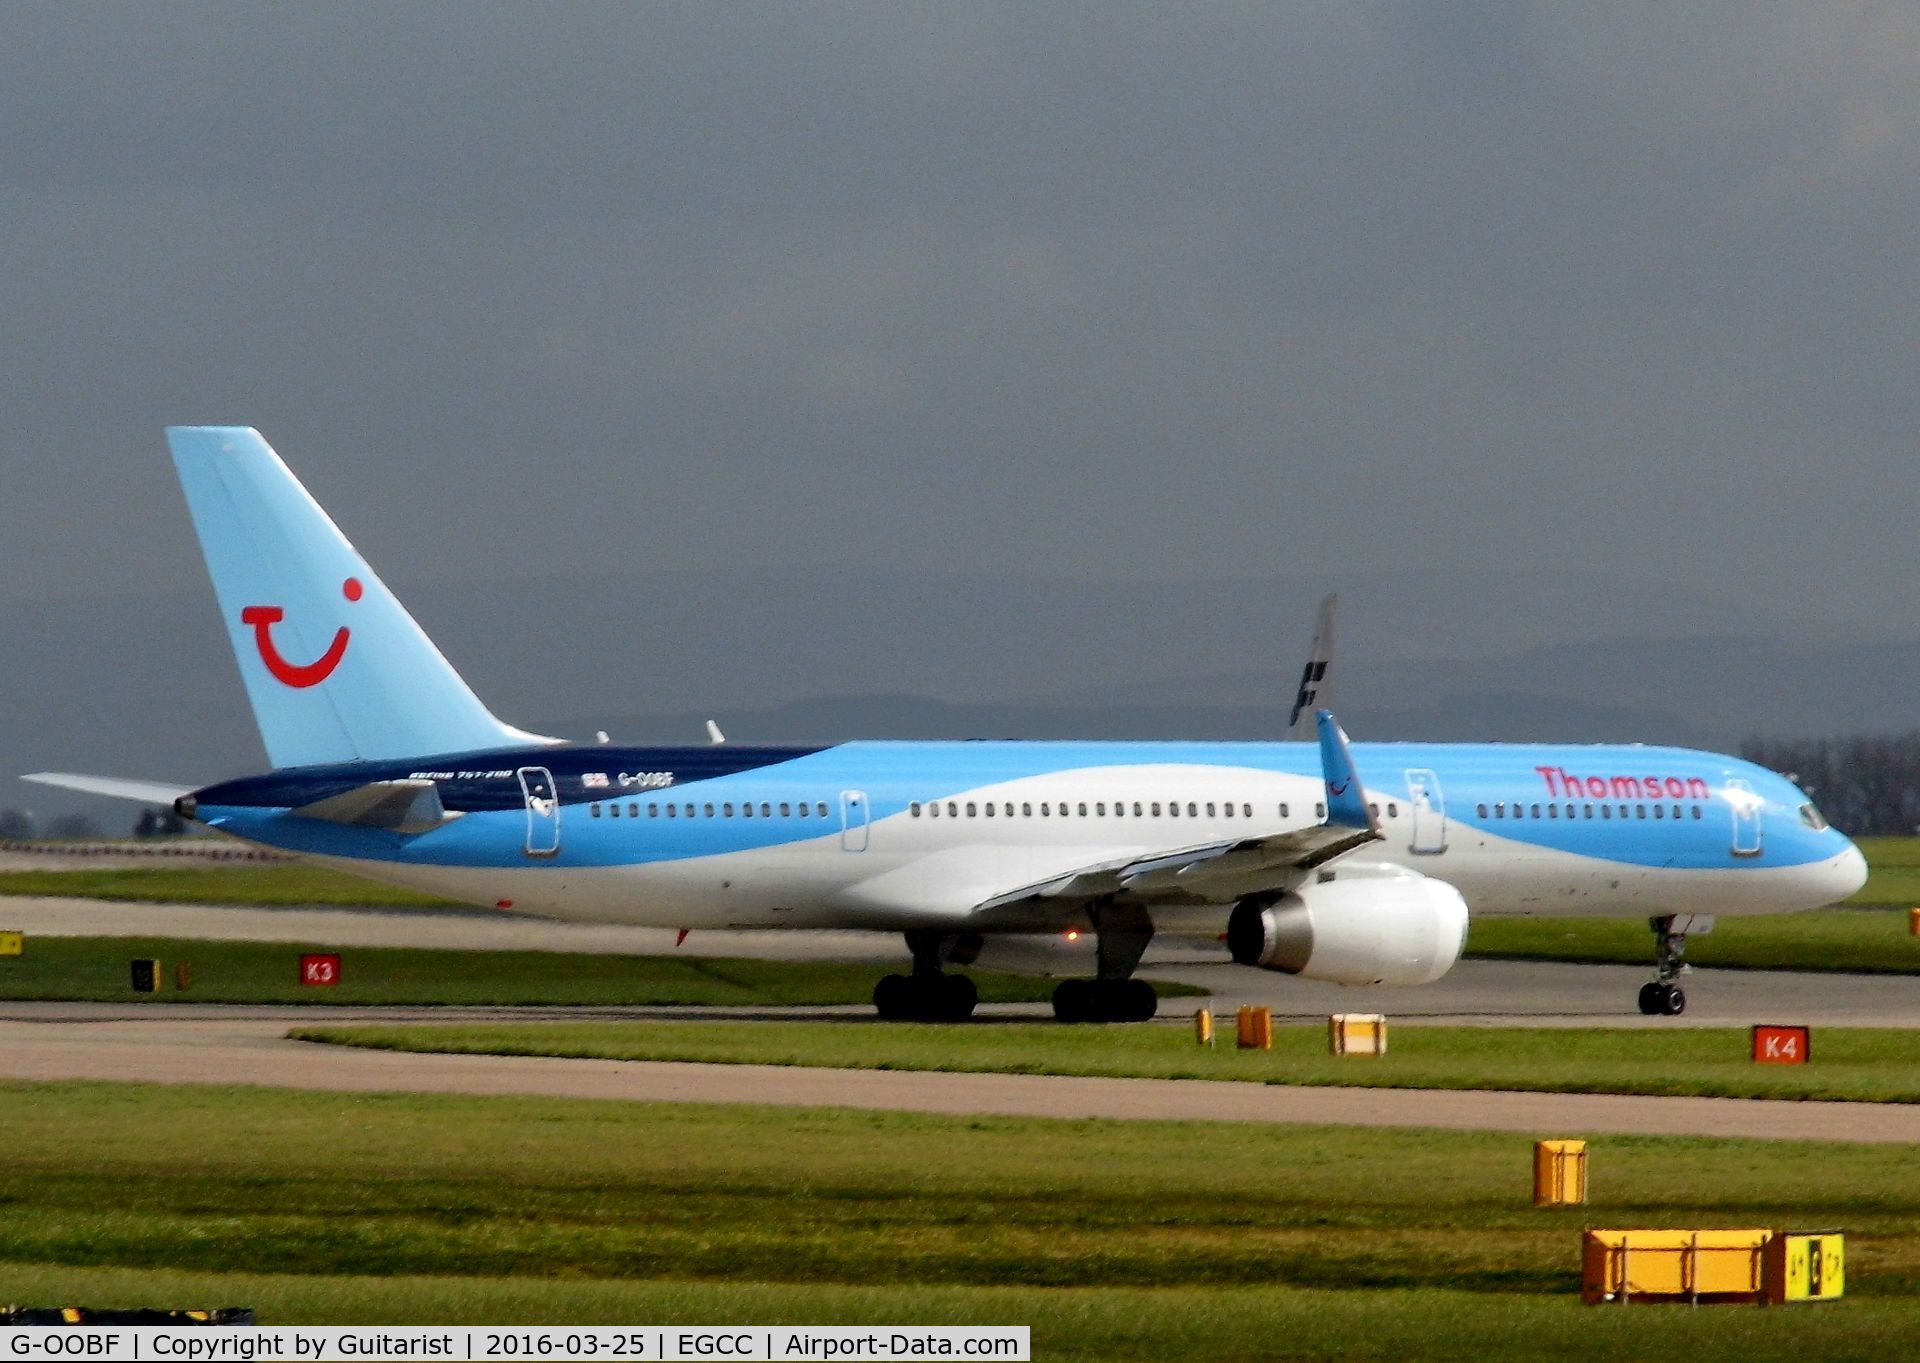 G-OOBF, 2004 Boeing 757-28A C/N 33101, At Manchester